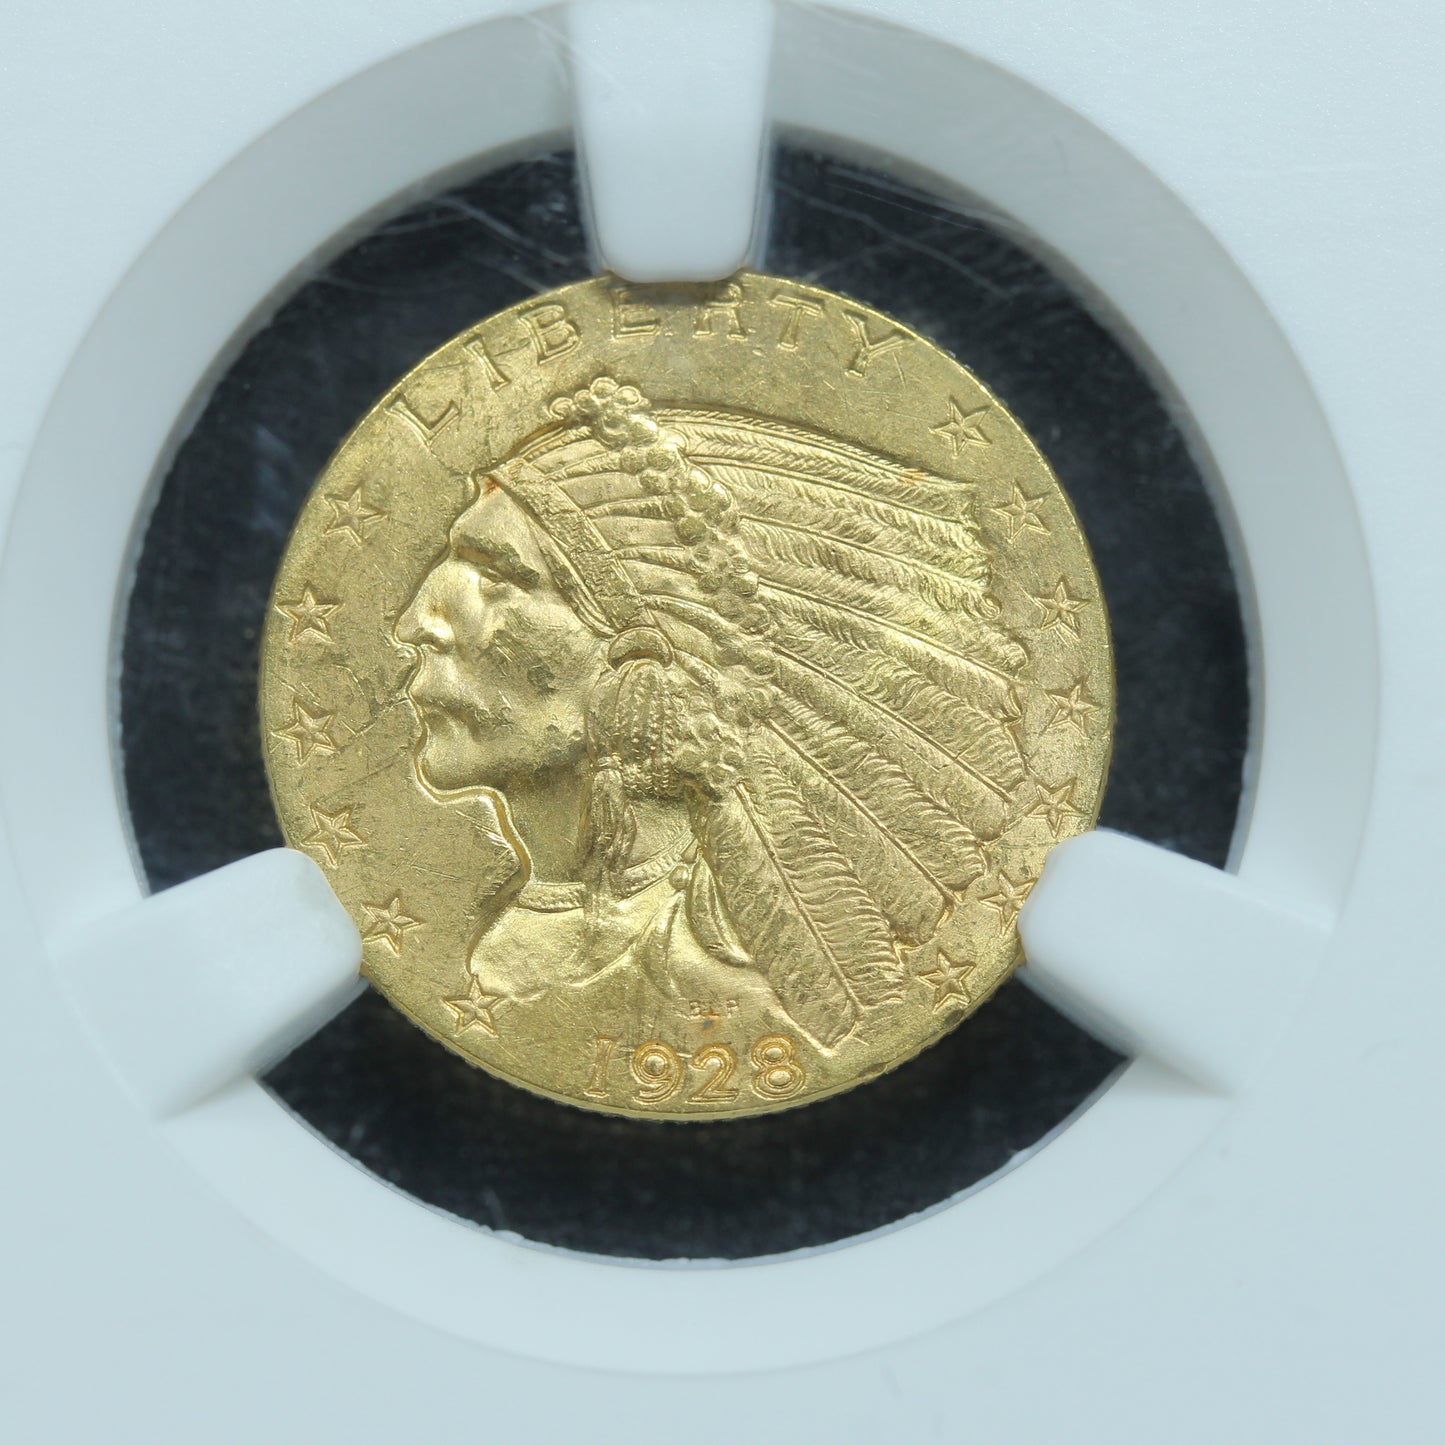 1928 $ 2.5 2.50 Gold Indian Head Quarter Eagle Coin - NGC MS 62